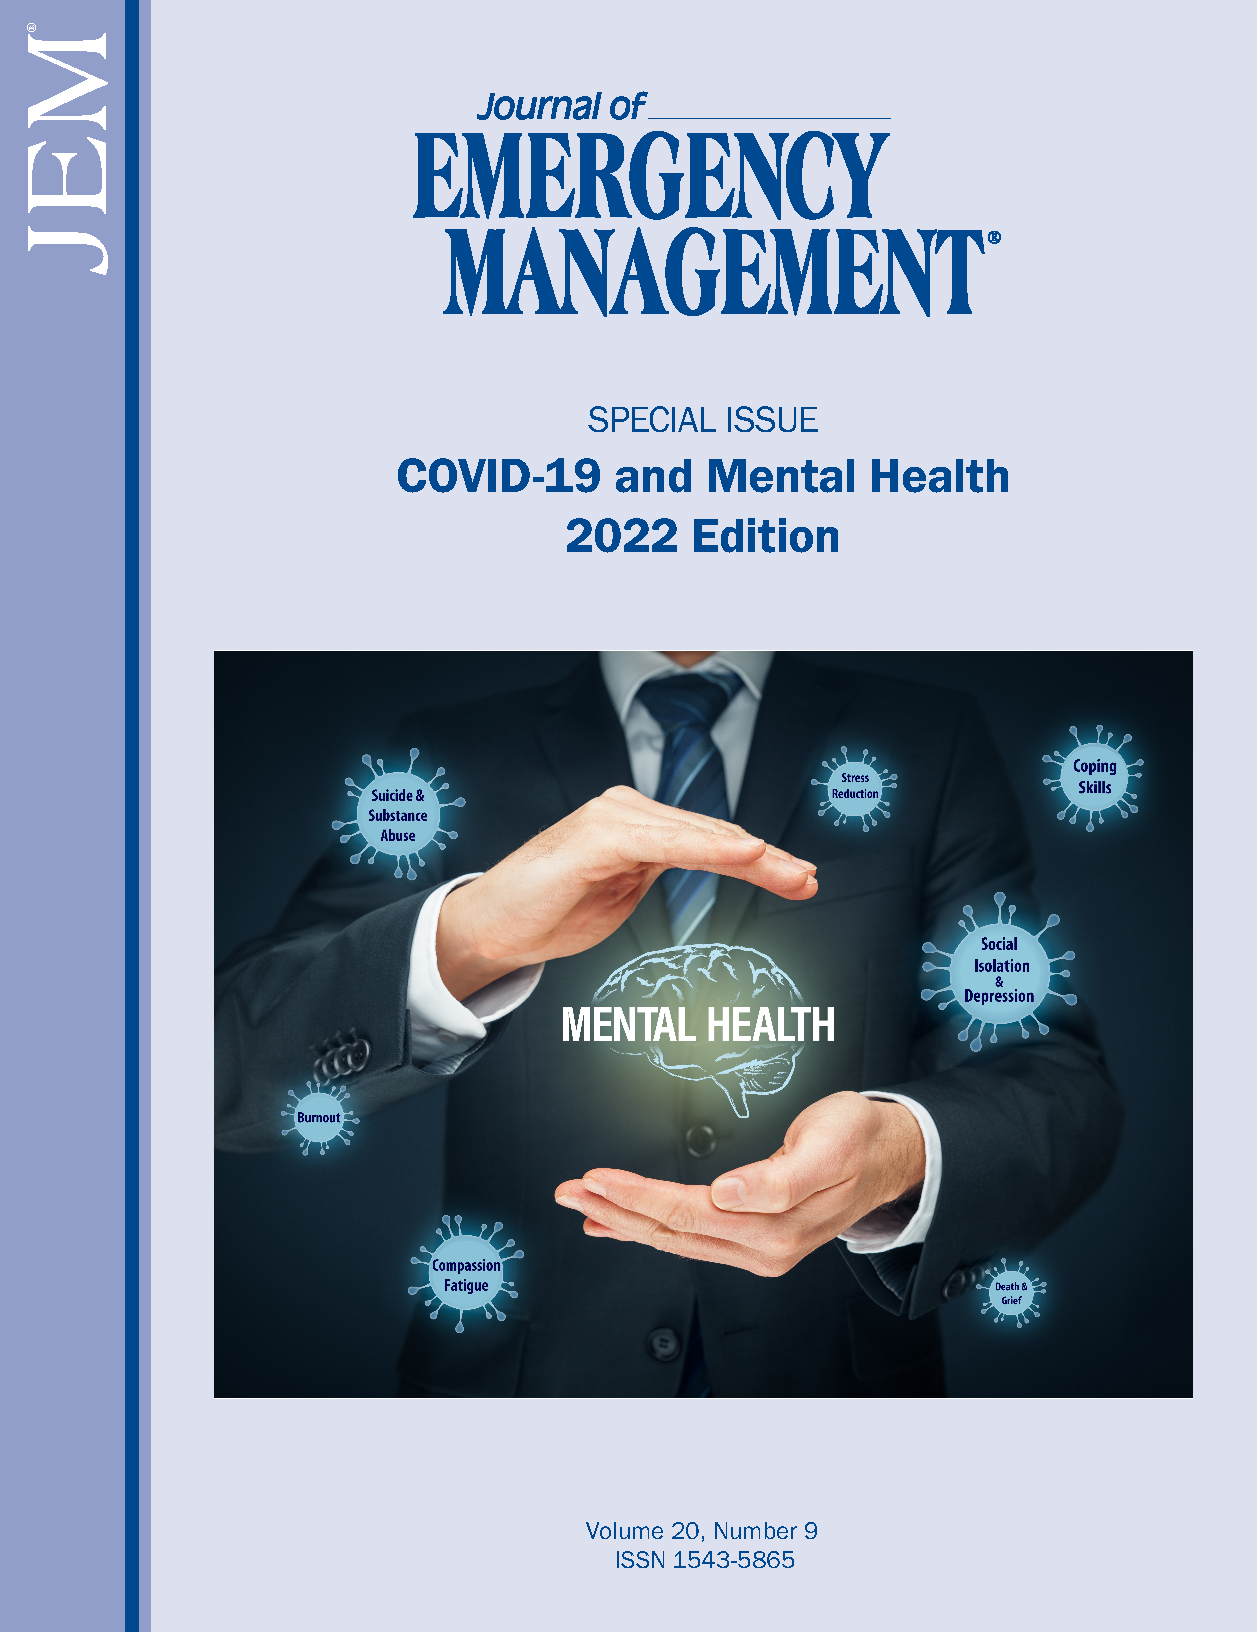 					View Vol. 20 No. 9 (2022): Special Issue on COVID-19 and Mental Health - 2022 Edition
				